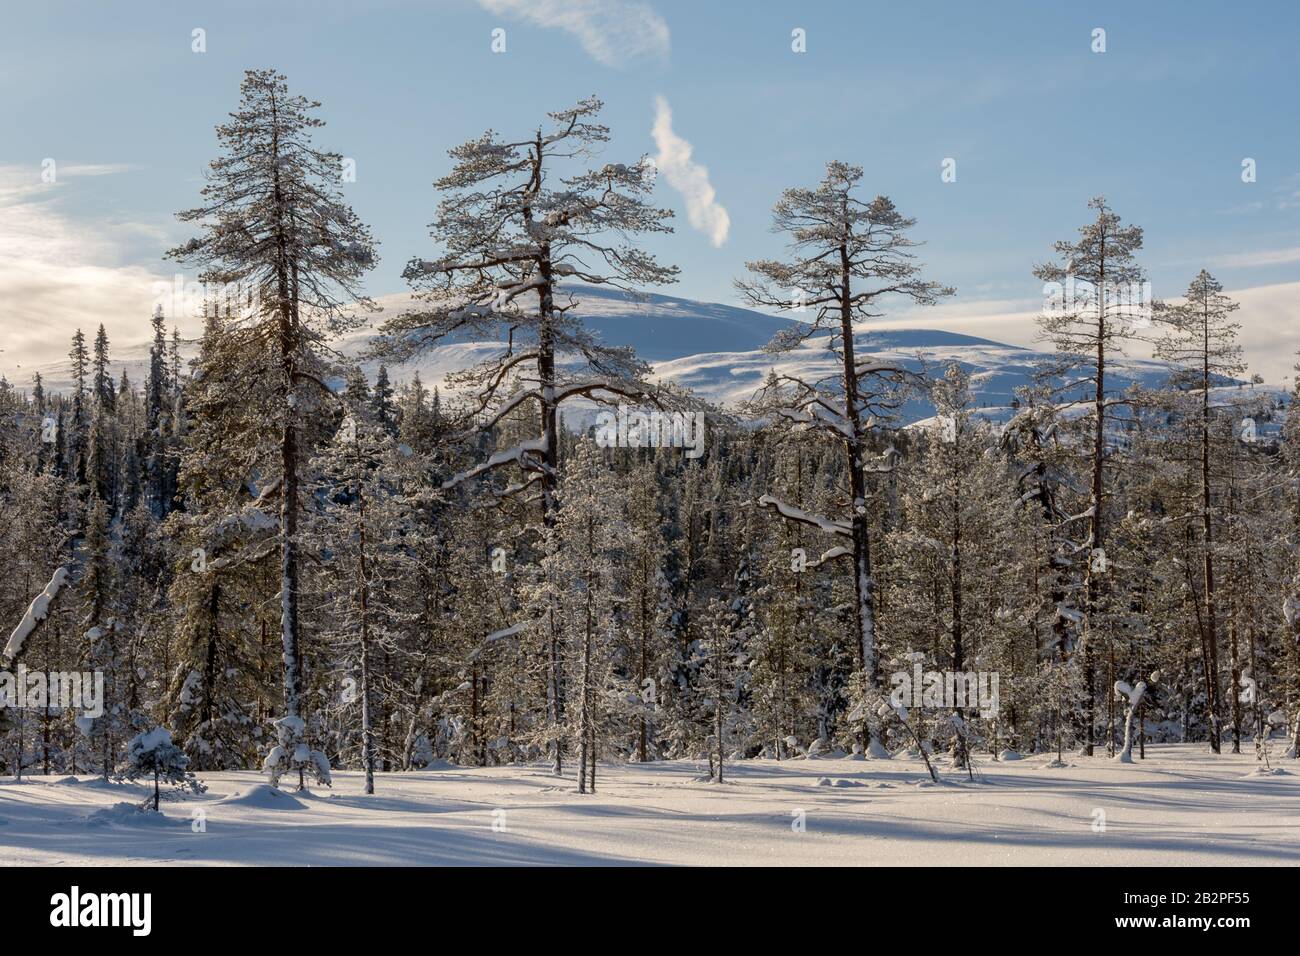 Snowy forest and fells in Lapland in Finland Stock Photo